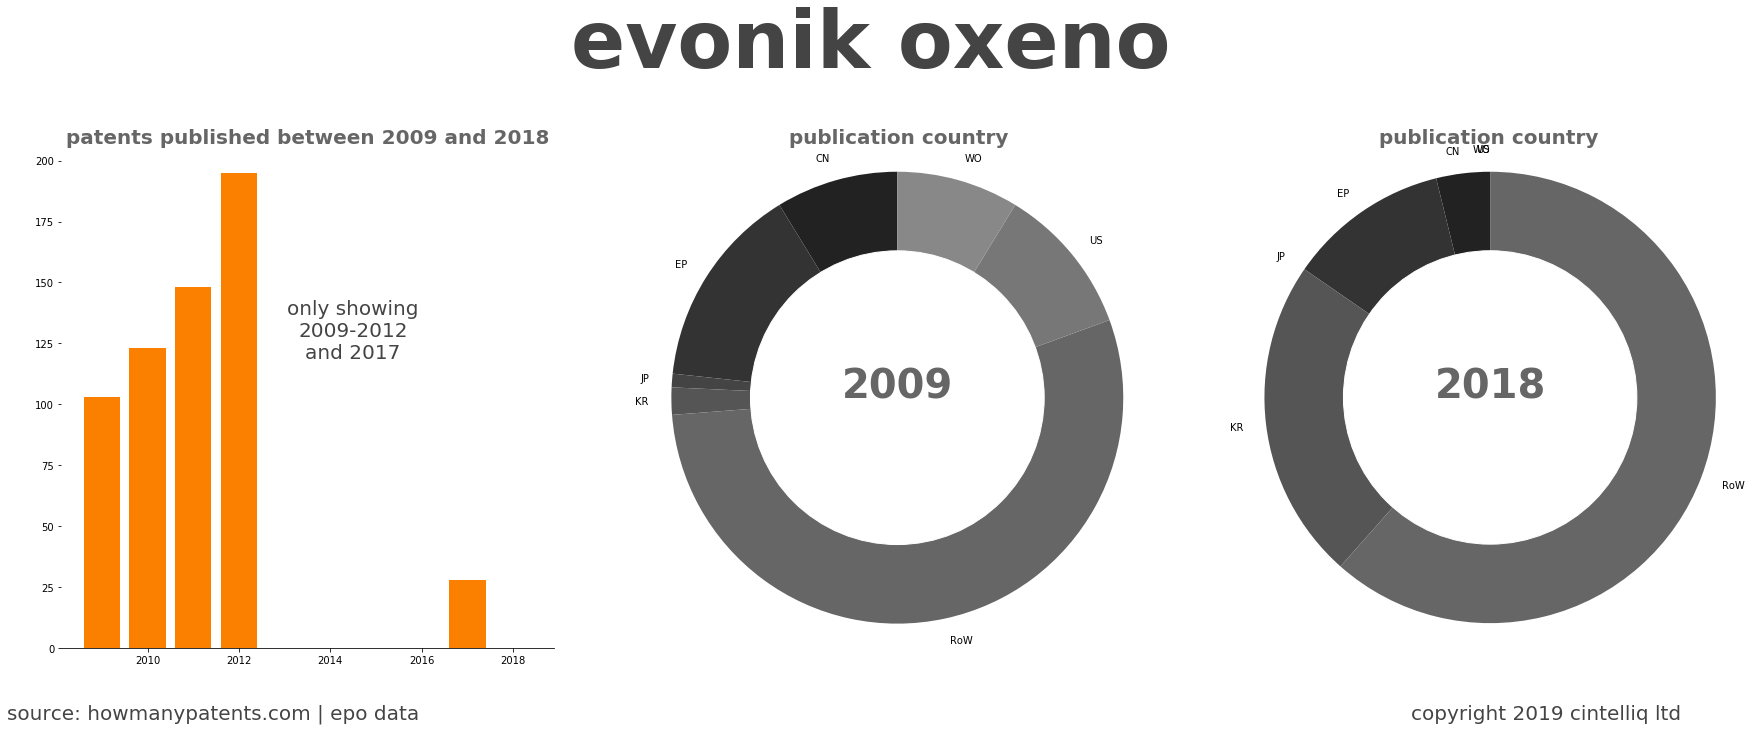 summary of patents for Evonik Oxeno